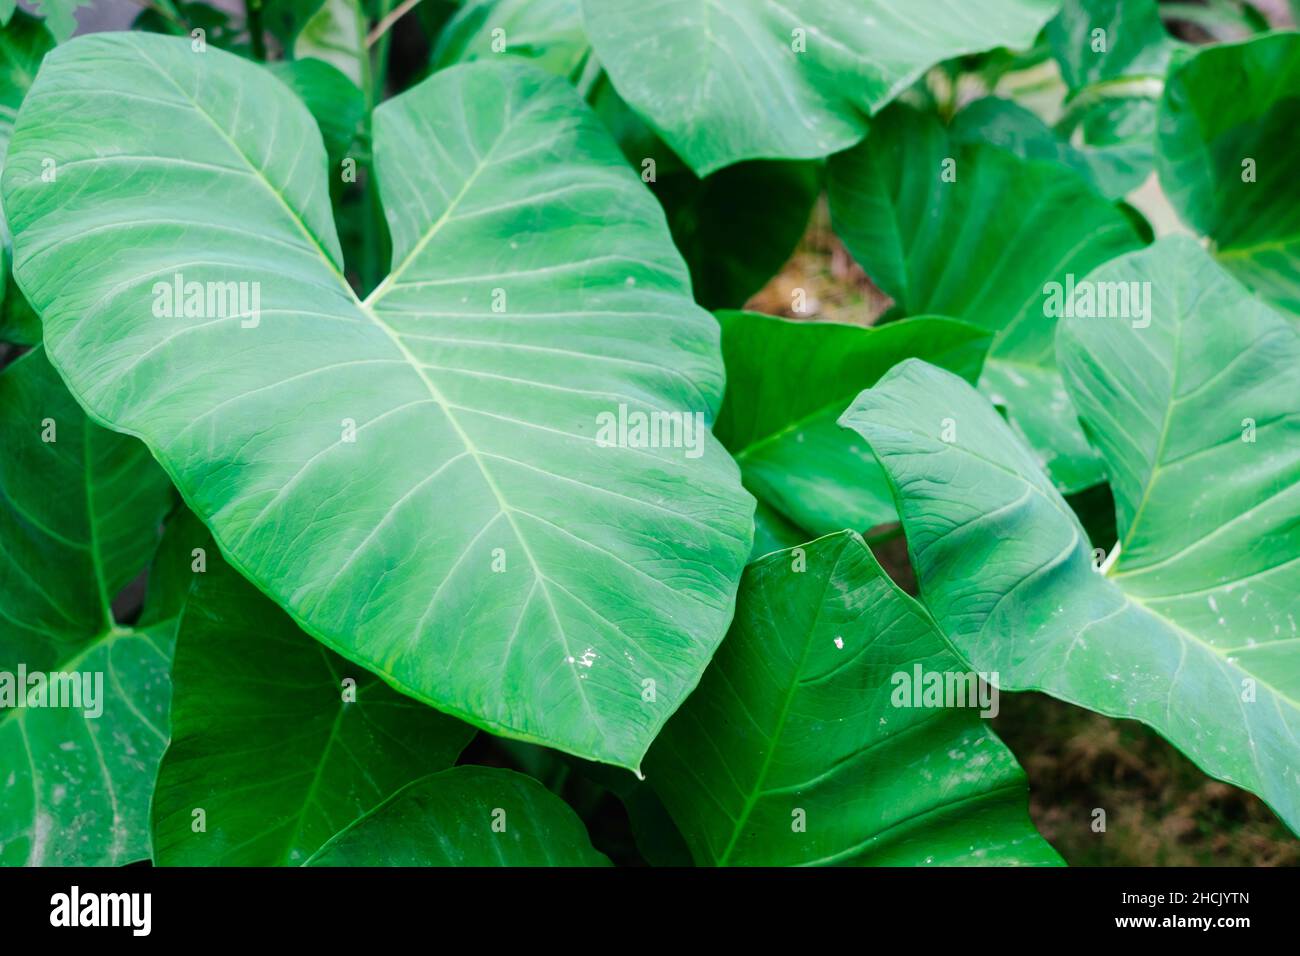 Closeup of organic waterproof heart shape green edible Taro leaves. Taro edible leaves is nutritious and delicious starchy root crop. Selective focus. Stock Photo